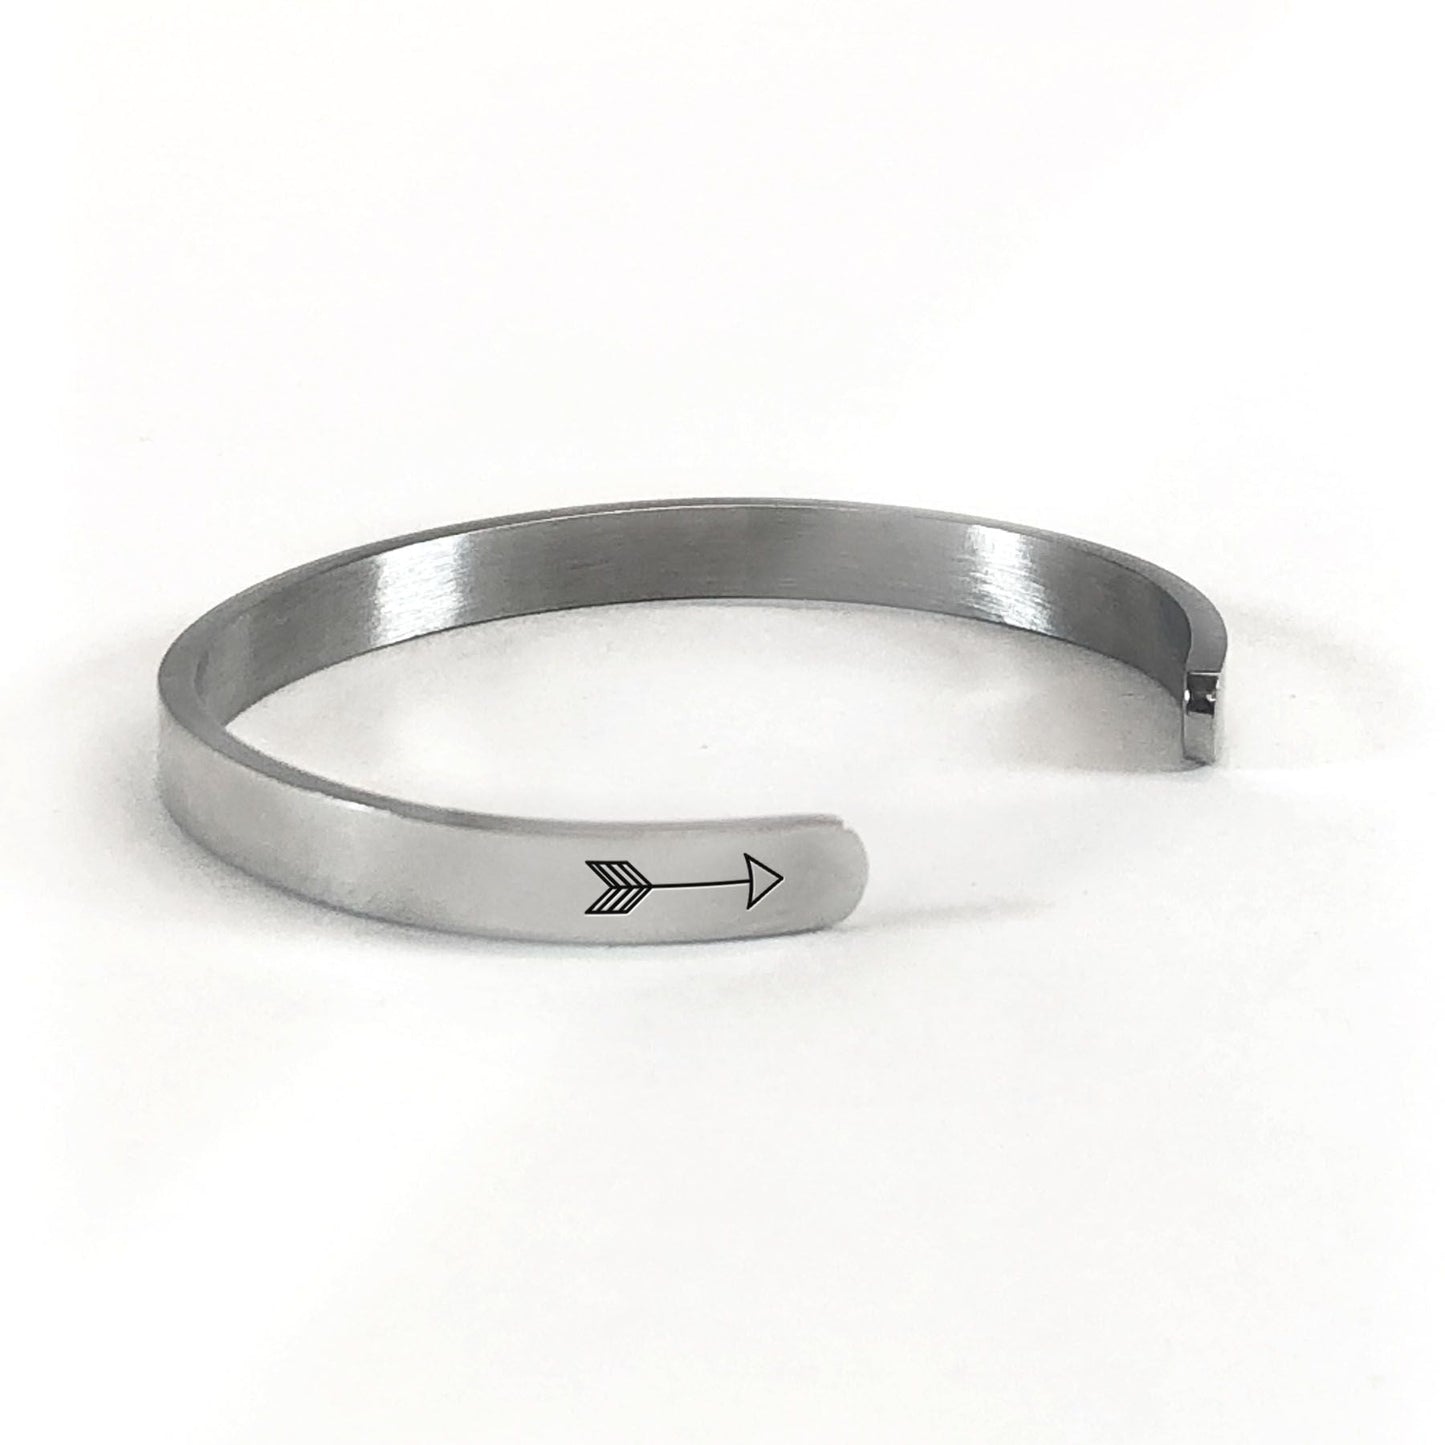 The love between a mother and daughter knows no distance bracelet in silver rotated to show arrows and cuff opening